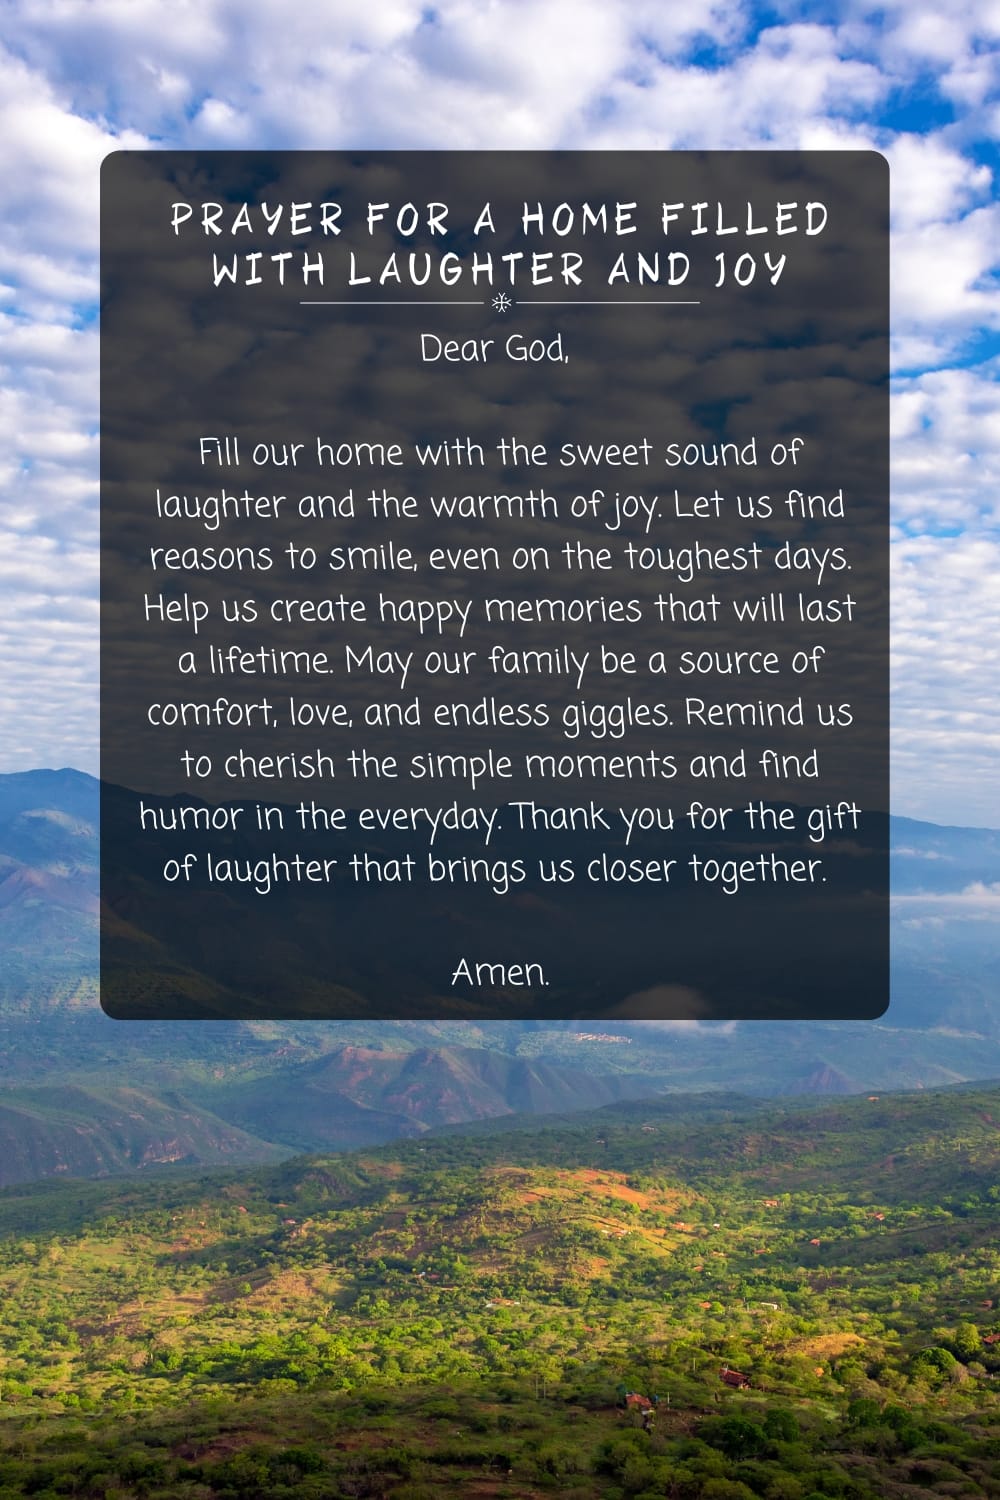 Prayer For a Home Filled With Laughter and Joy